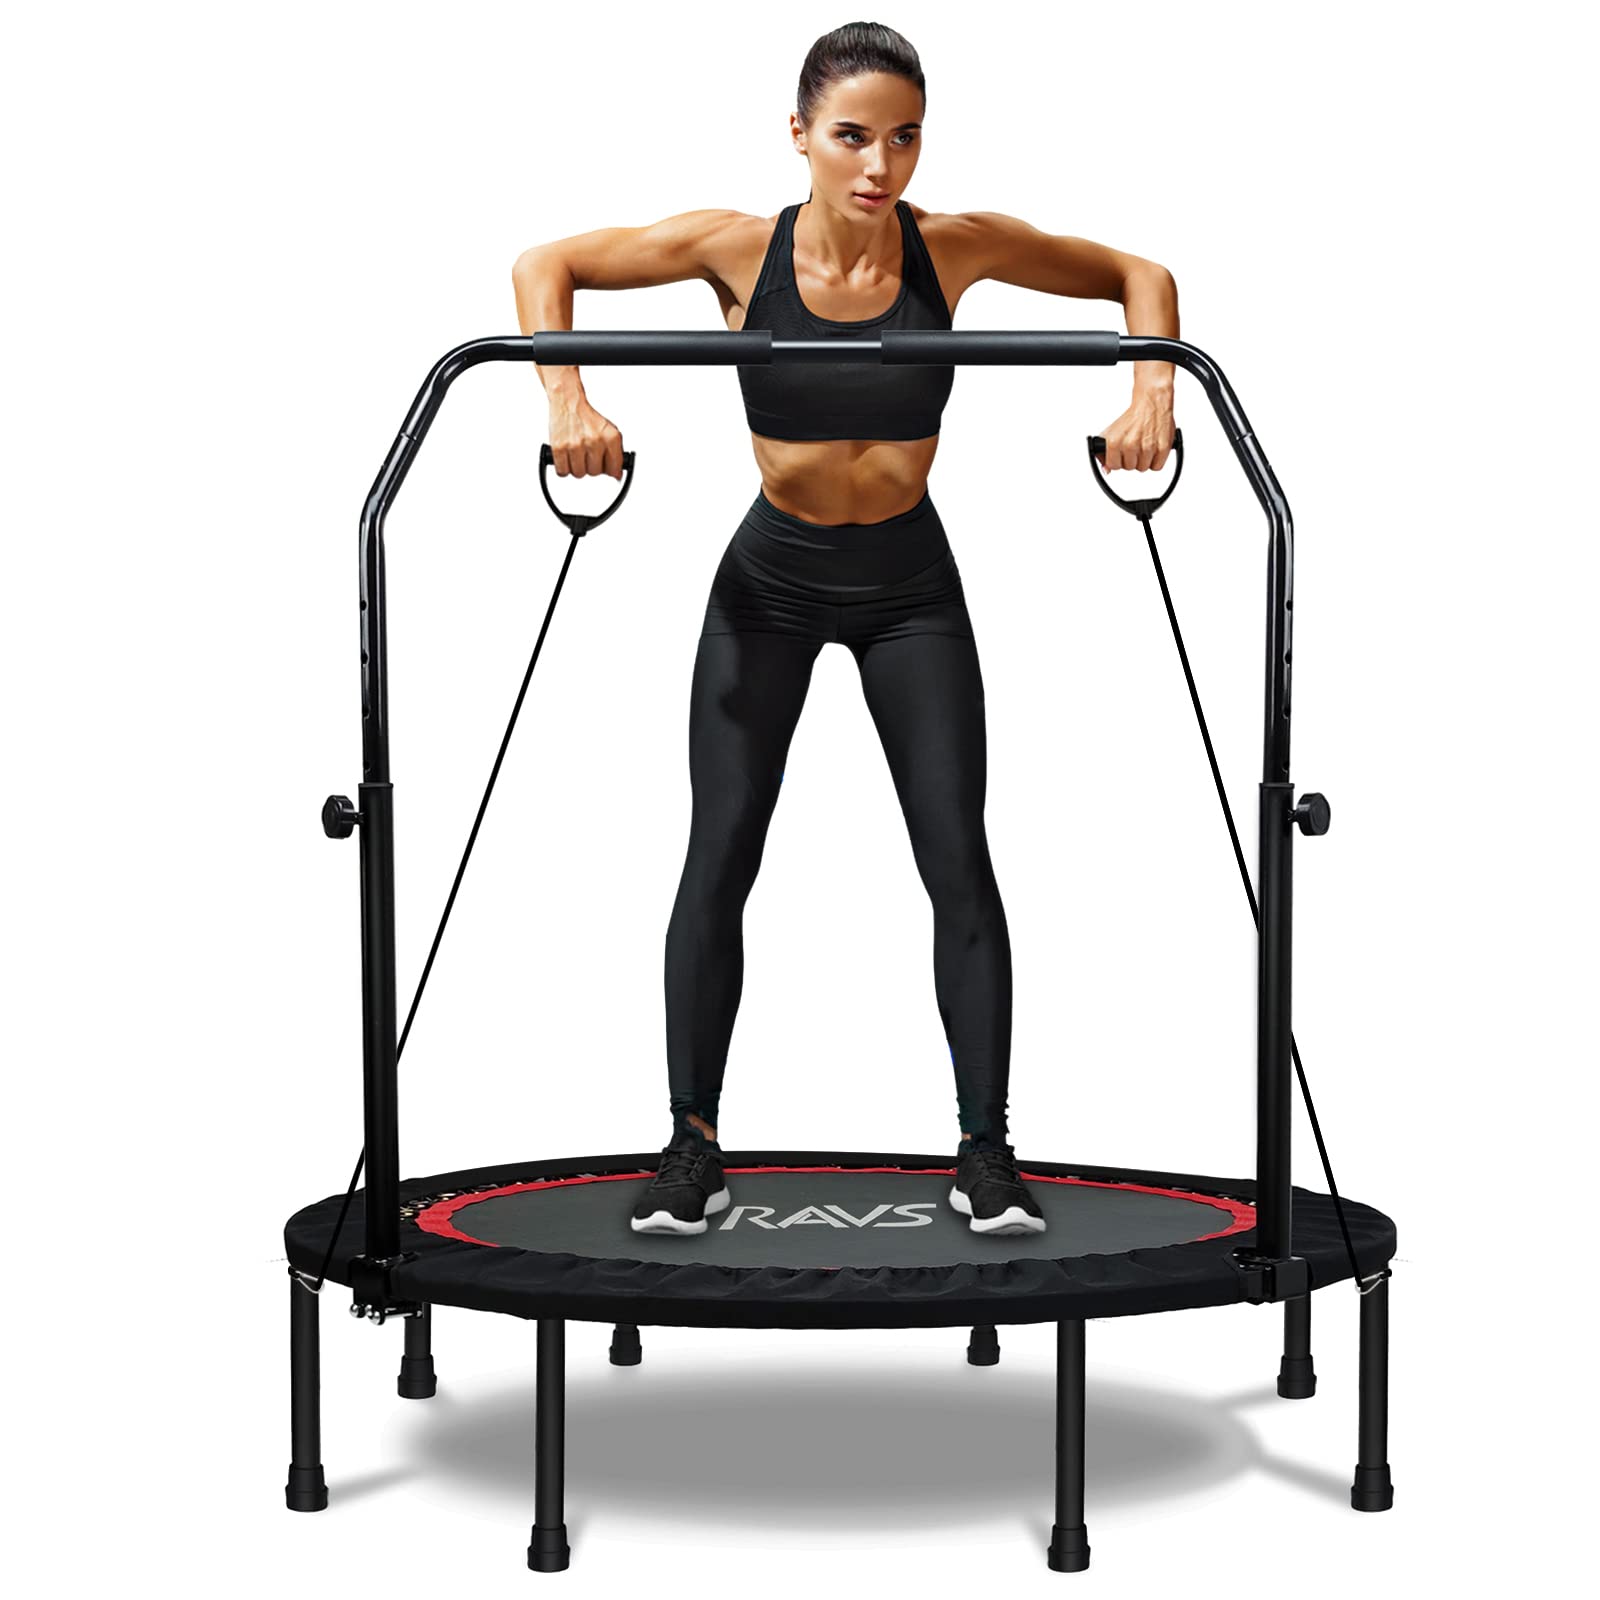 RAVS Mini Trampoline for Kids Adults 48 Foldable Fitness Rebounder Trampoline with Height Adjustable Handle - Exercise Trampolin